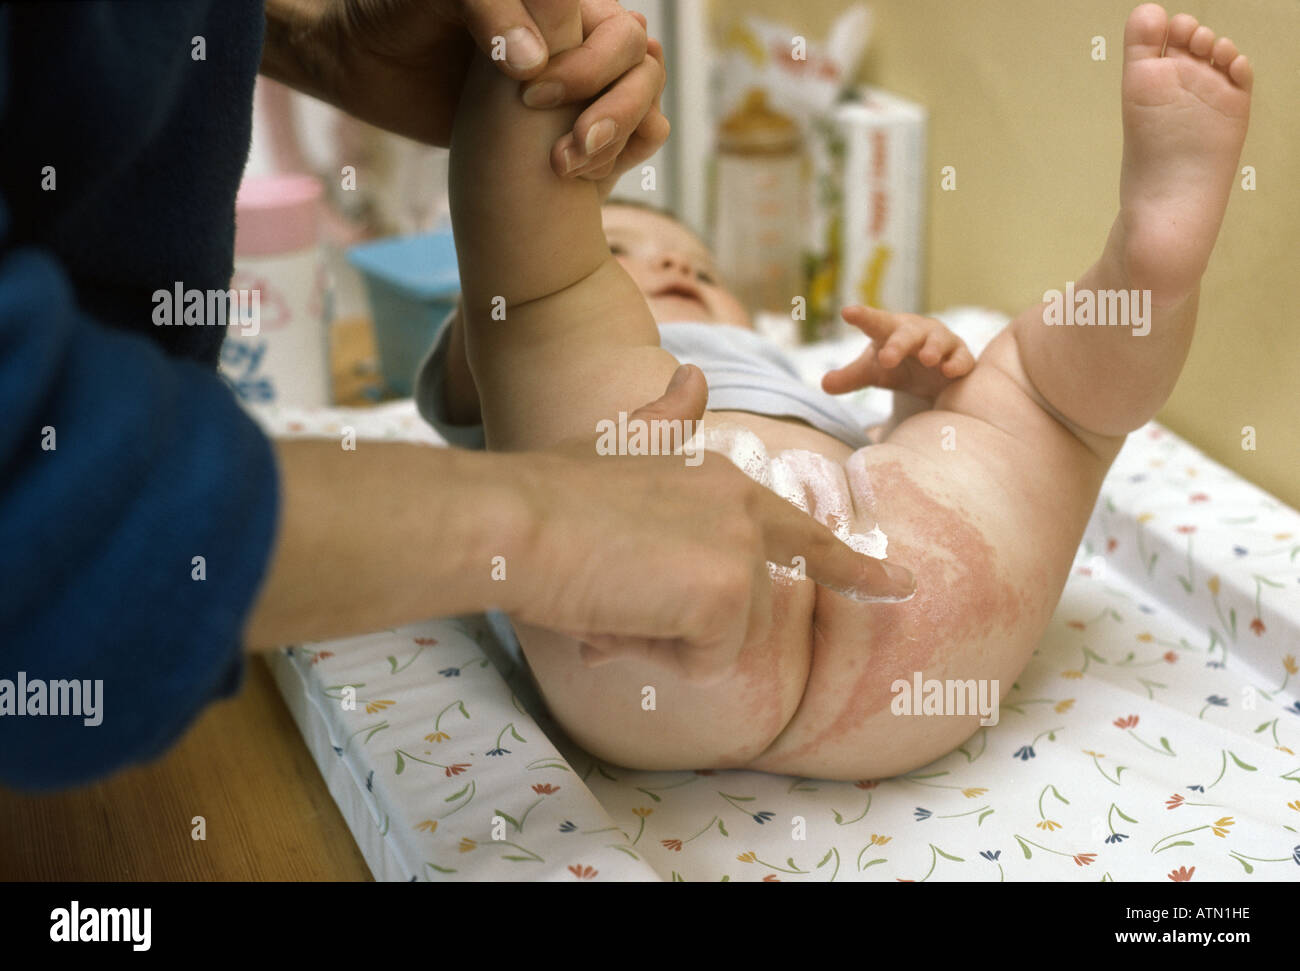 child suffering from nappy rash Stock Photo